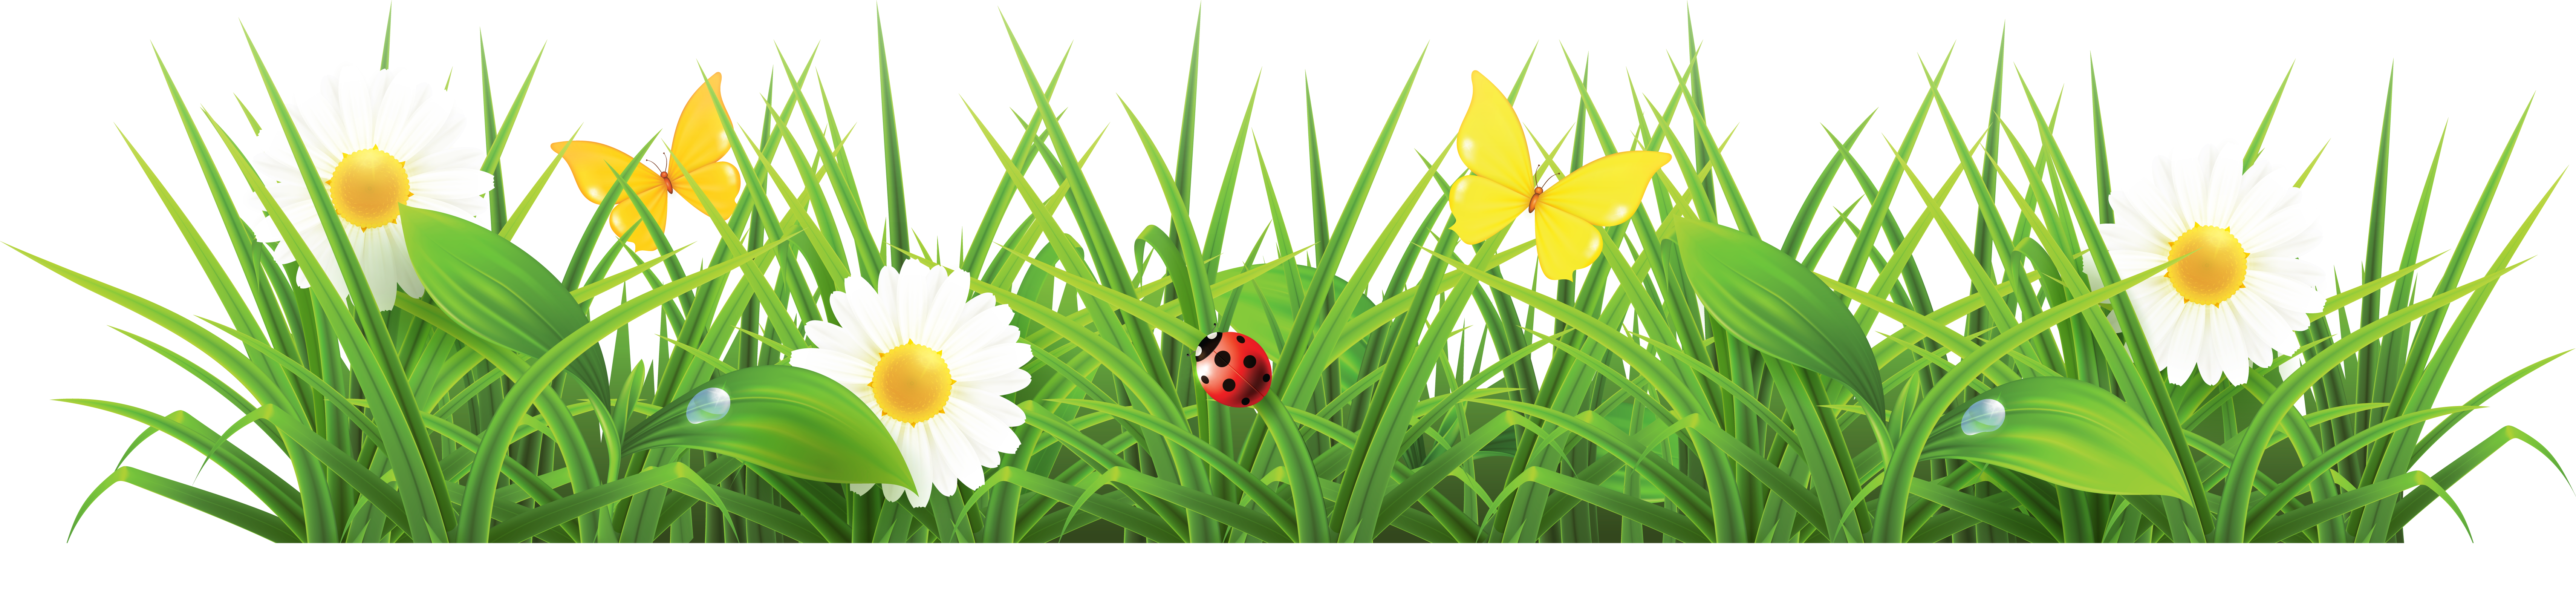 free clipart grass and flowers - photo #11